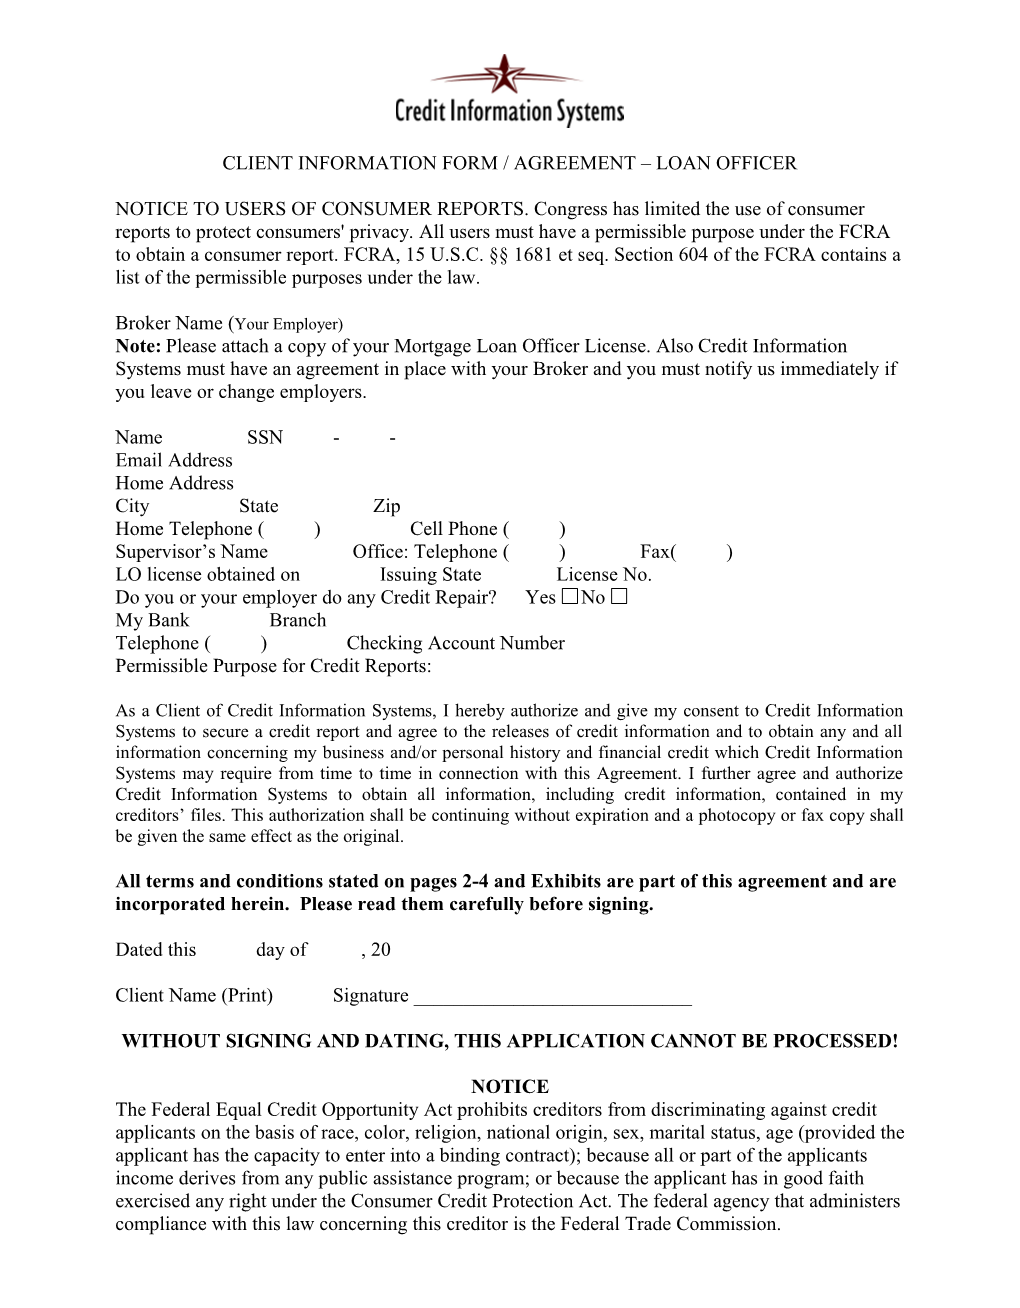 Client Information Form / Agreement Loan Officer